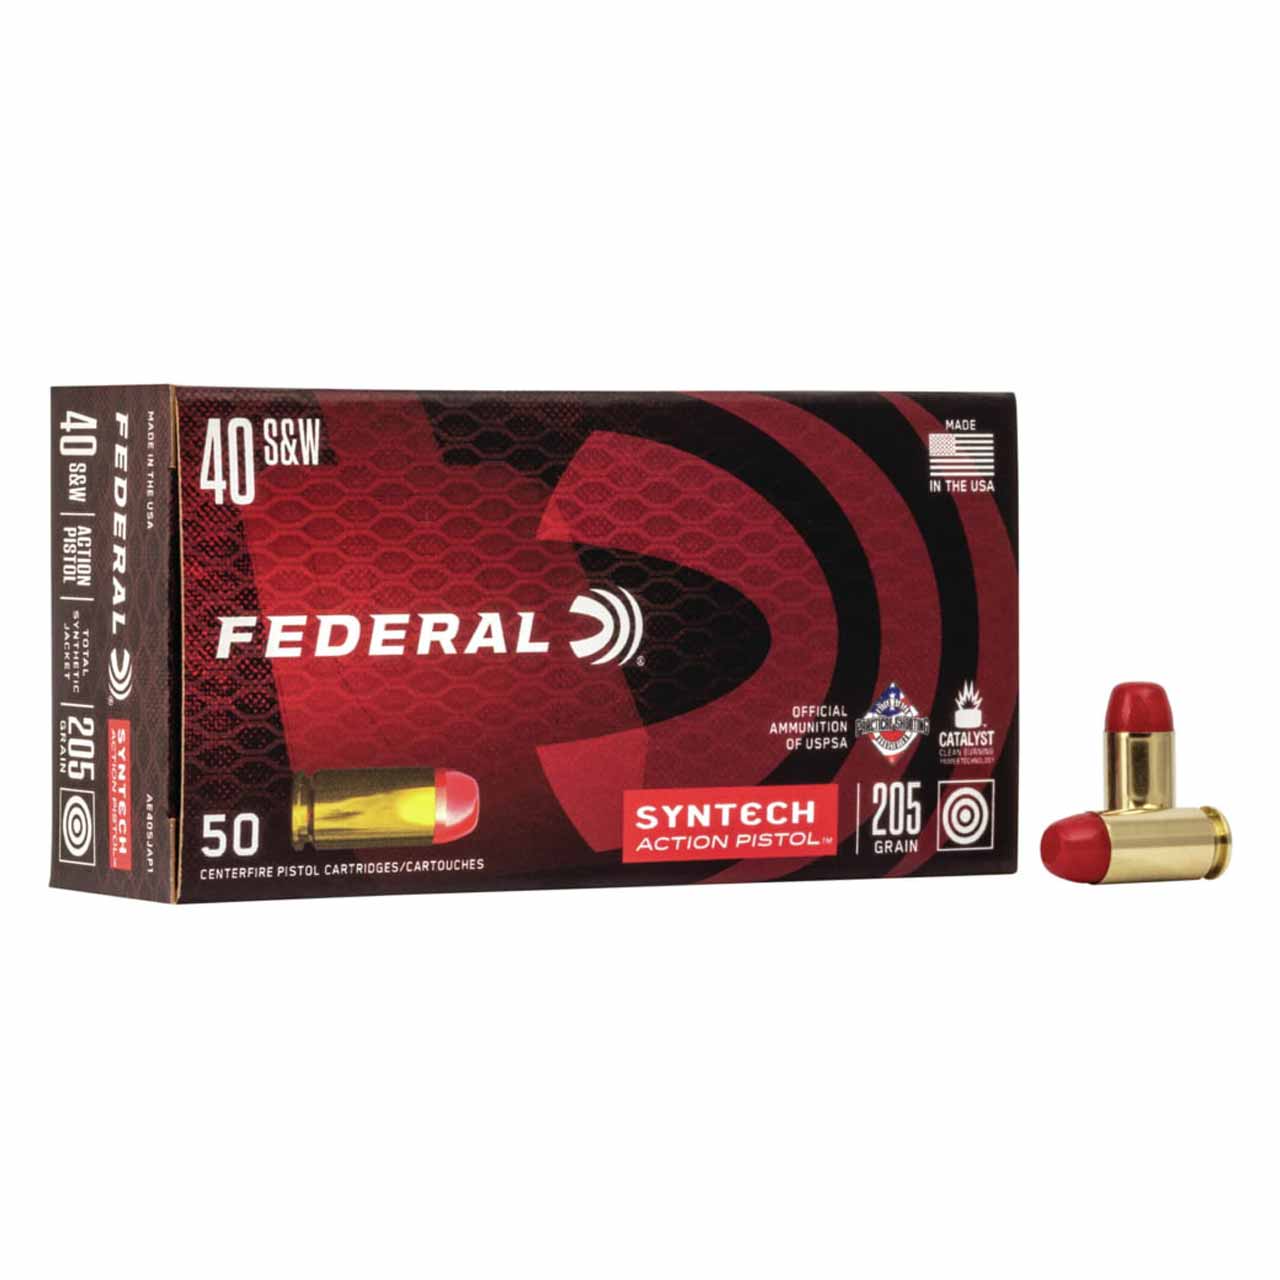 Federal Synthetic Ammo